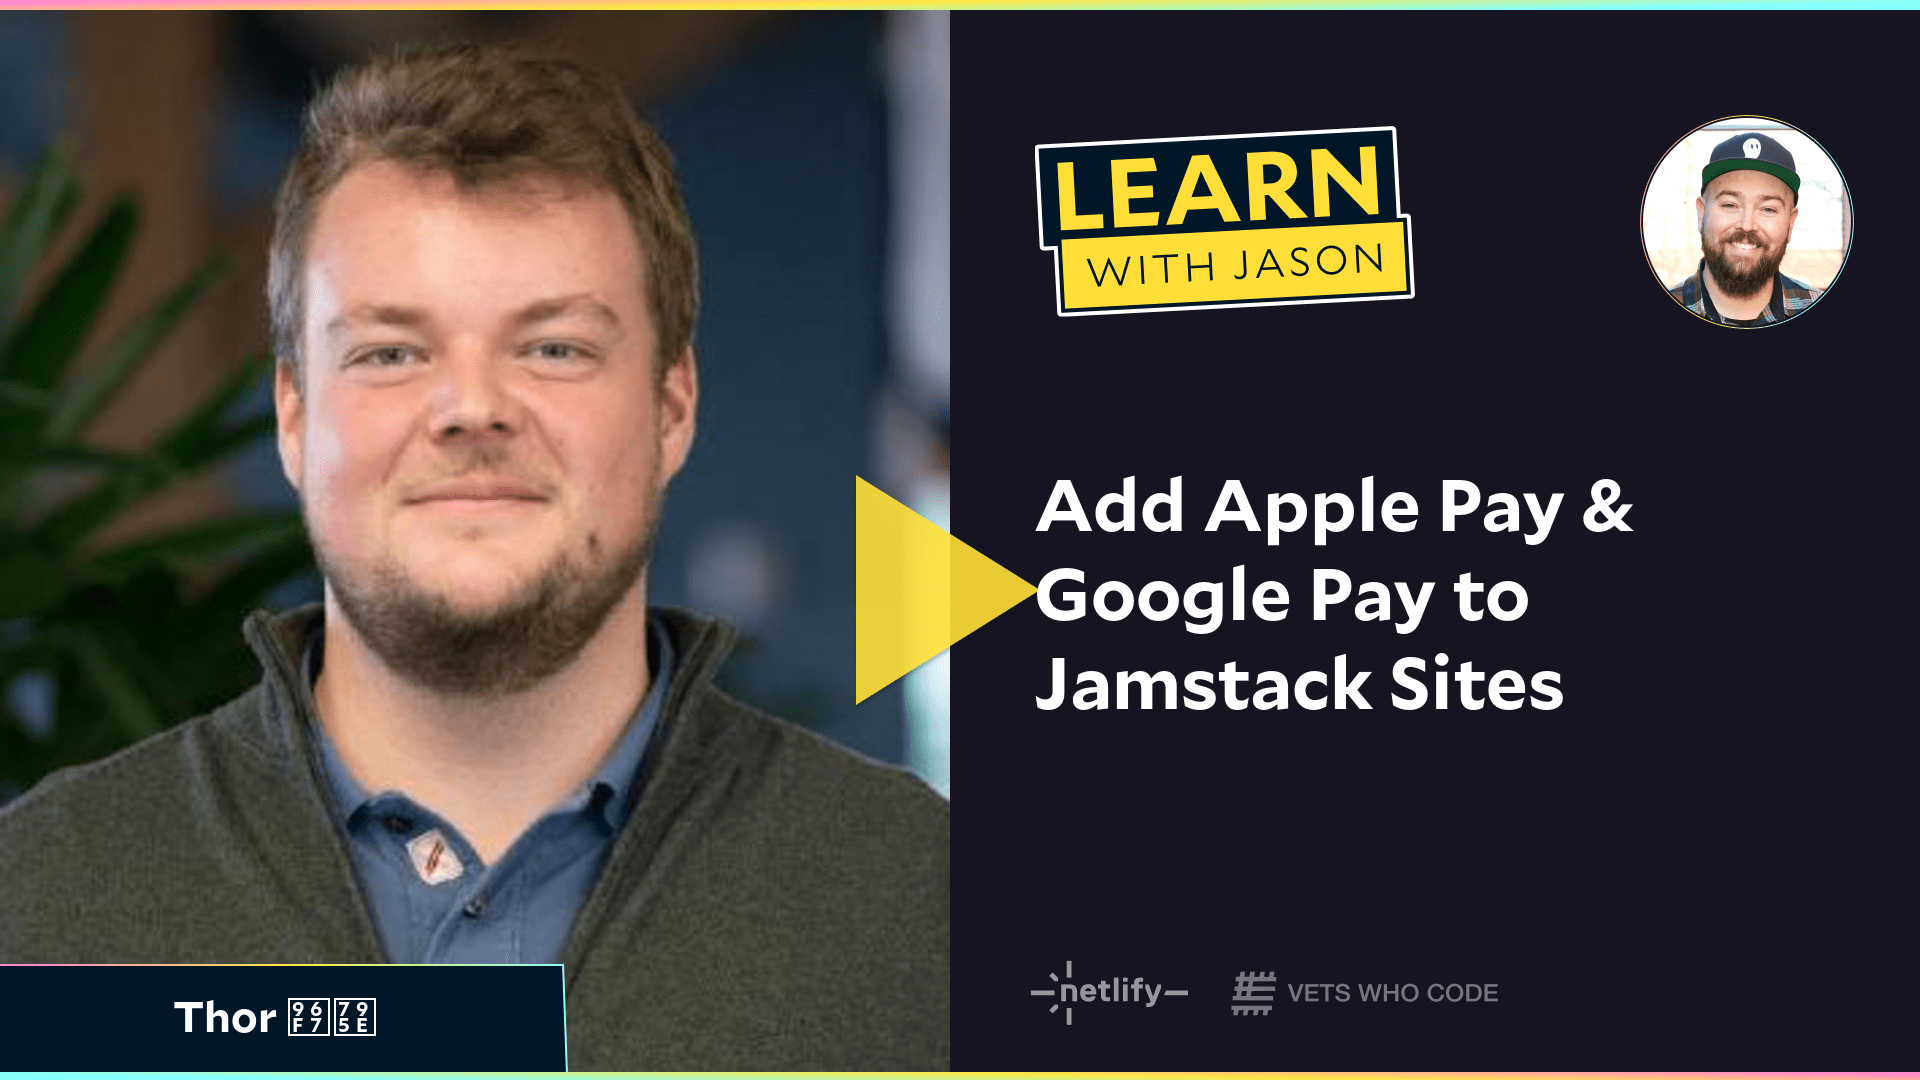 Add Apple Pay & Google Pay to Jamstack Sites (with Thor 雷神)